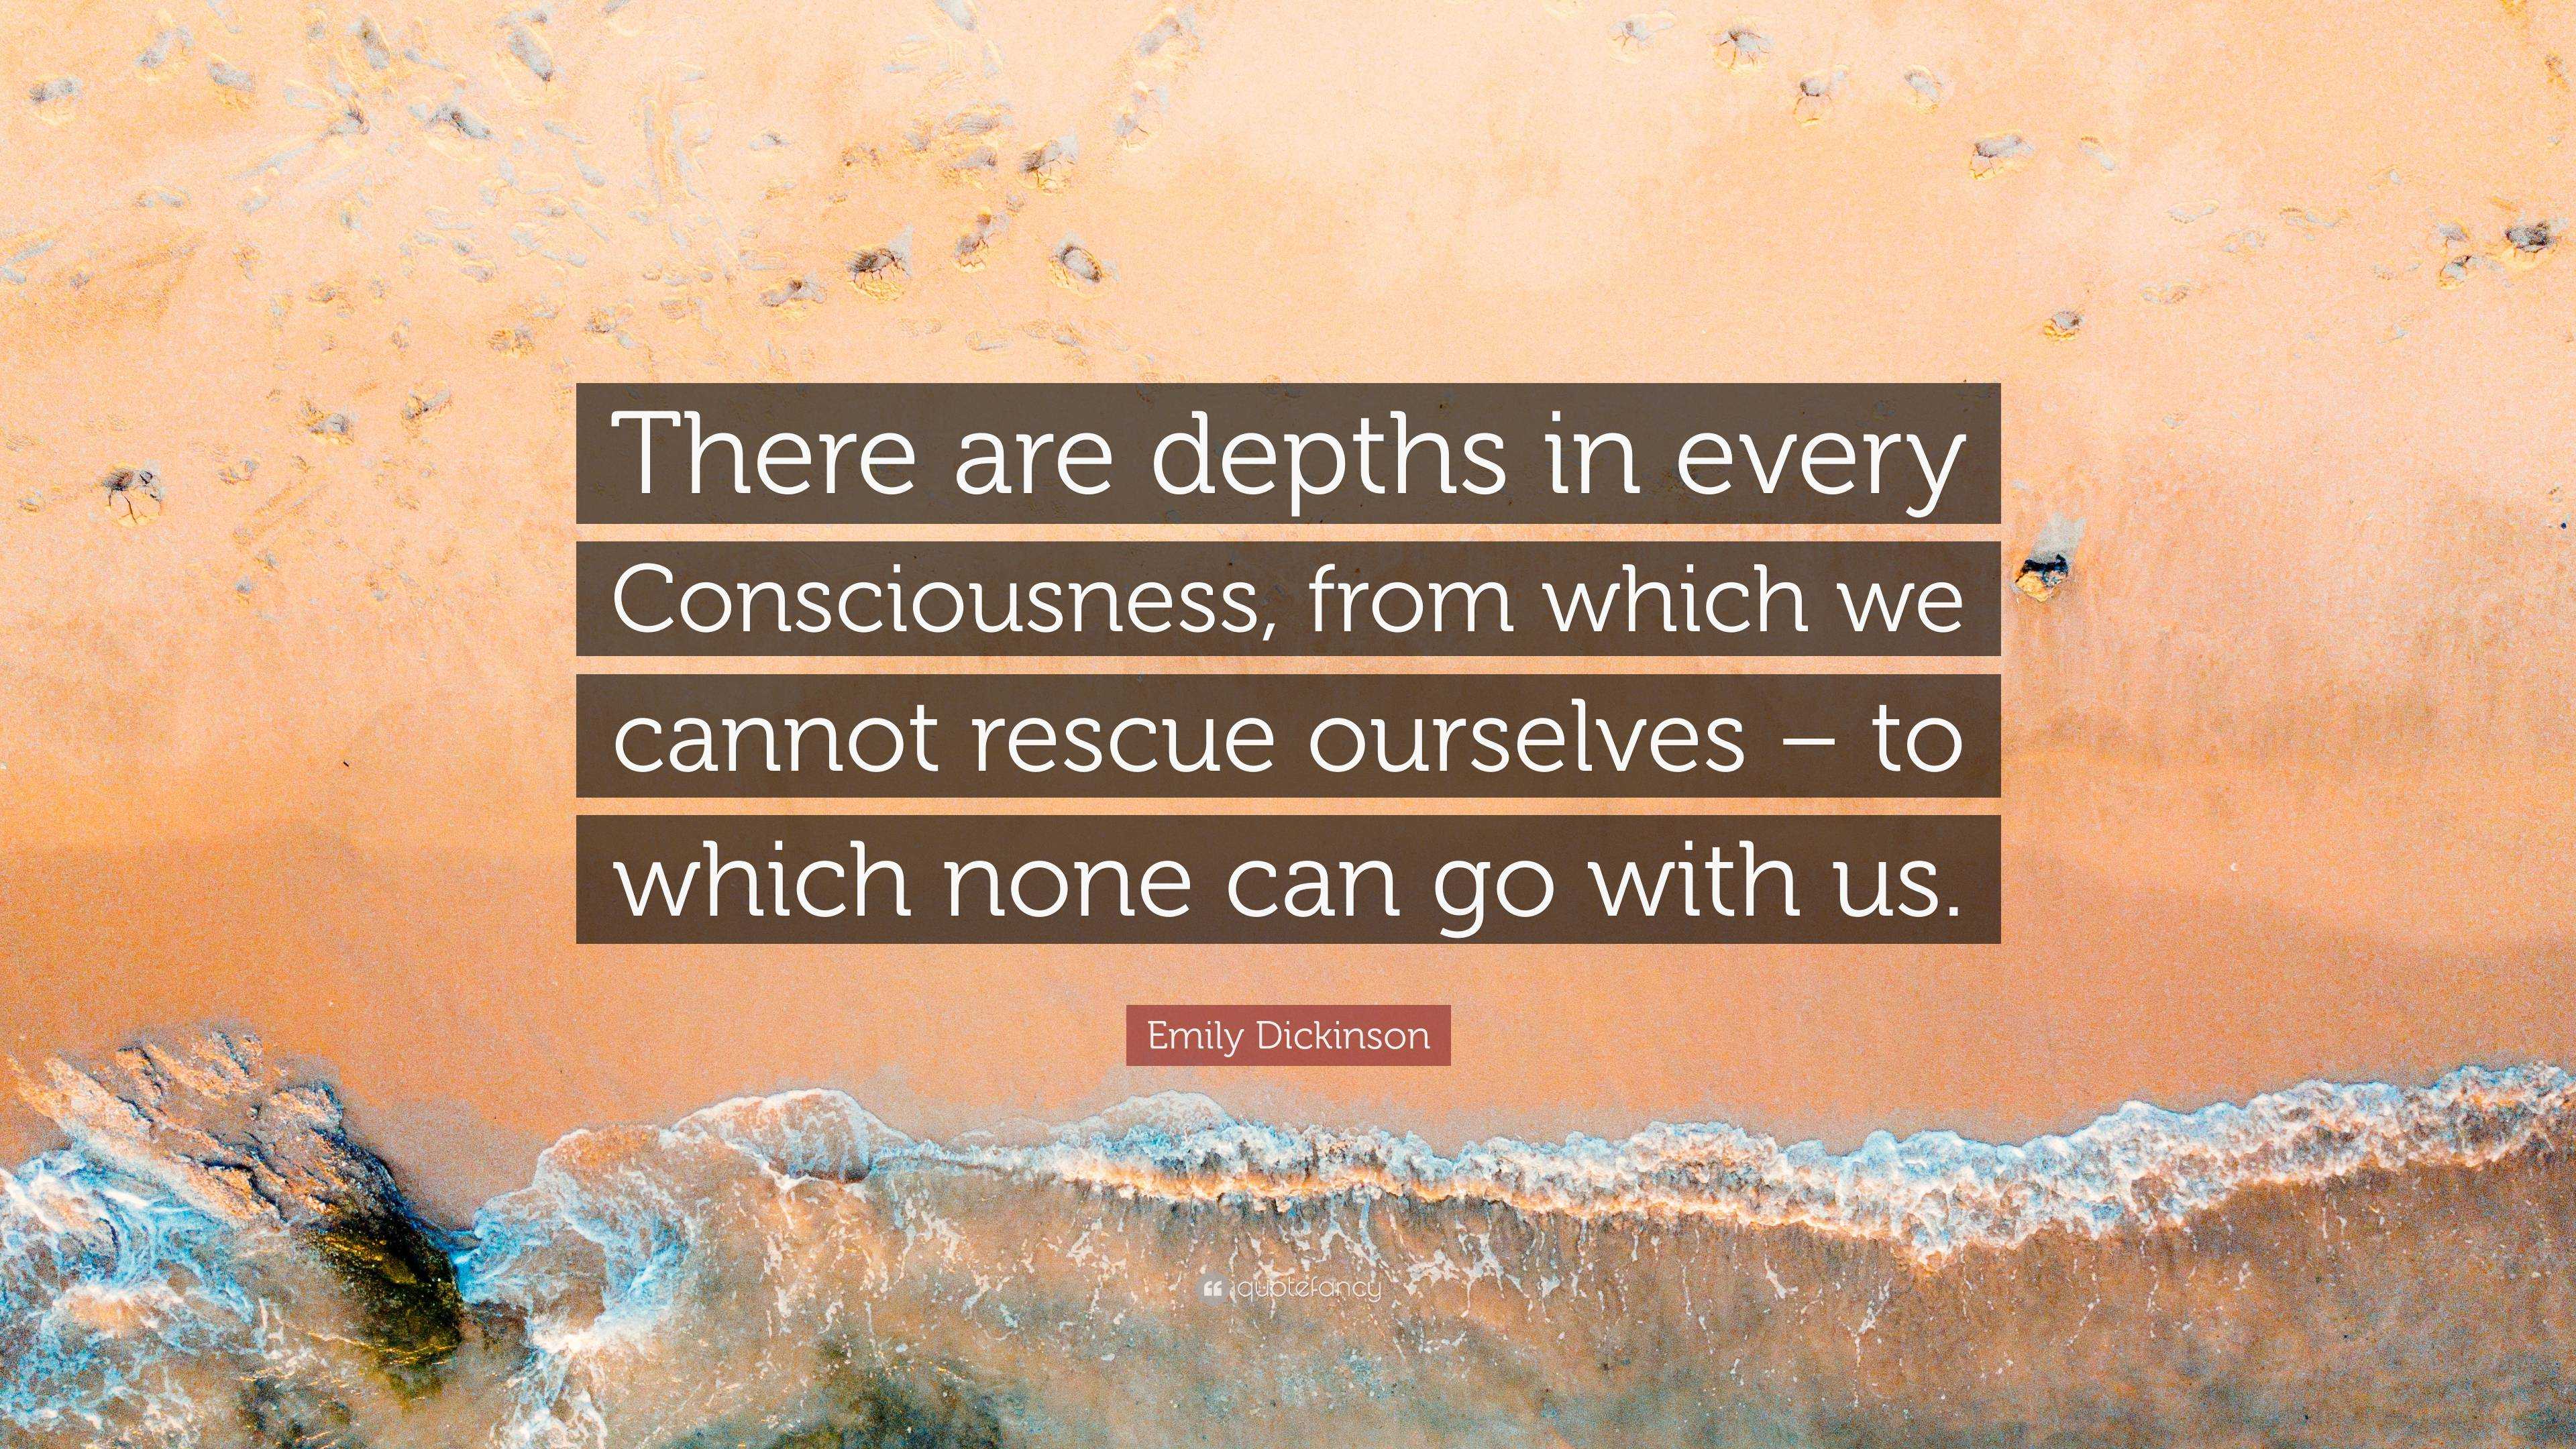 Emily Dickinson Quote: “There are depths in every Consciousness, from ...